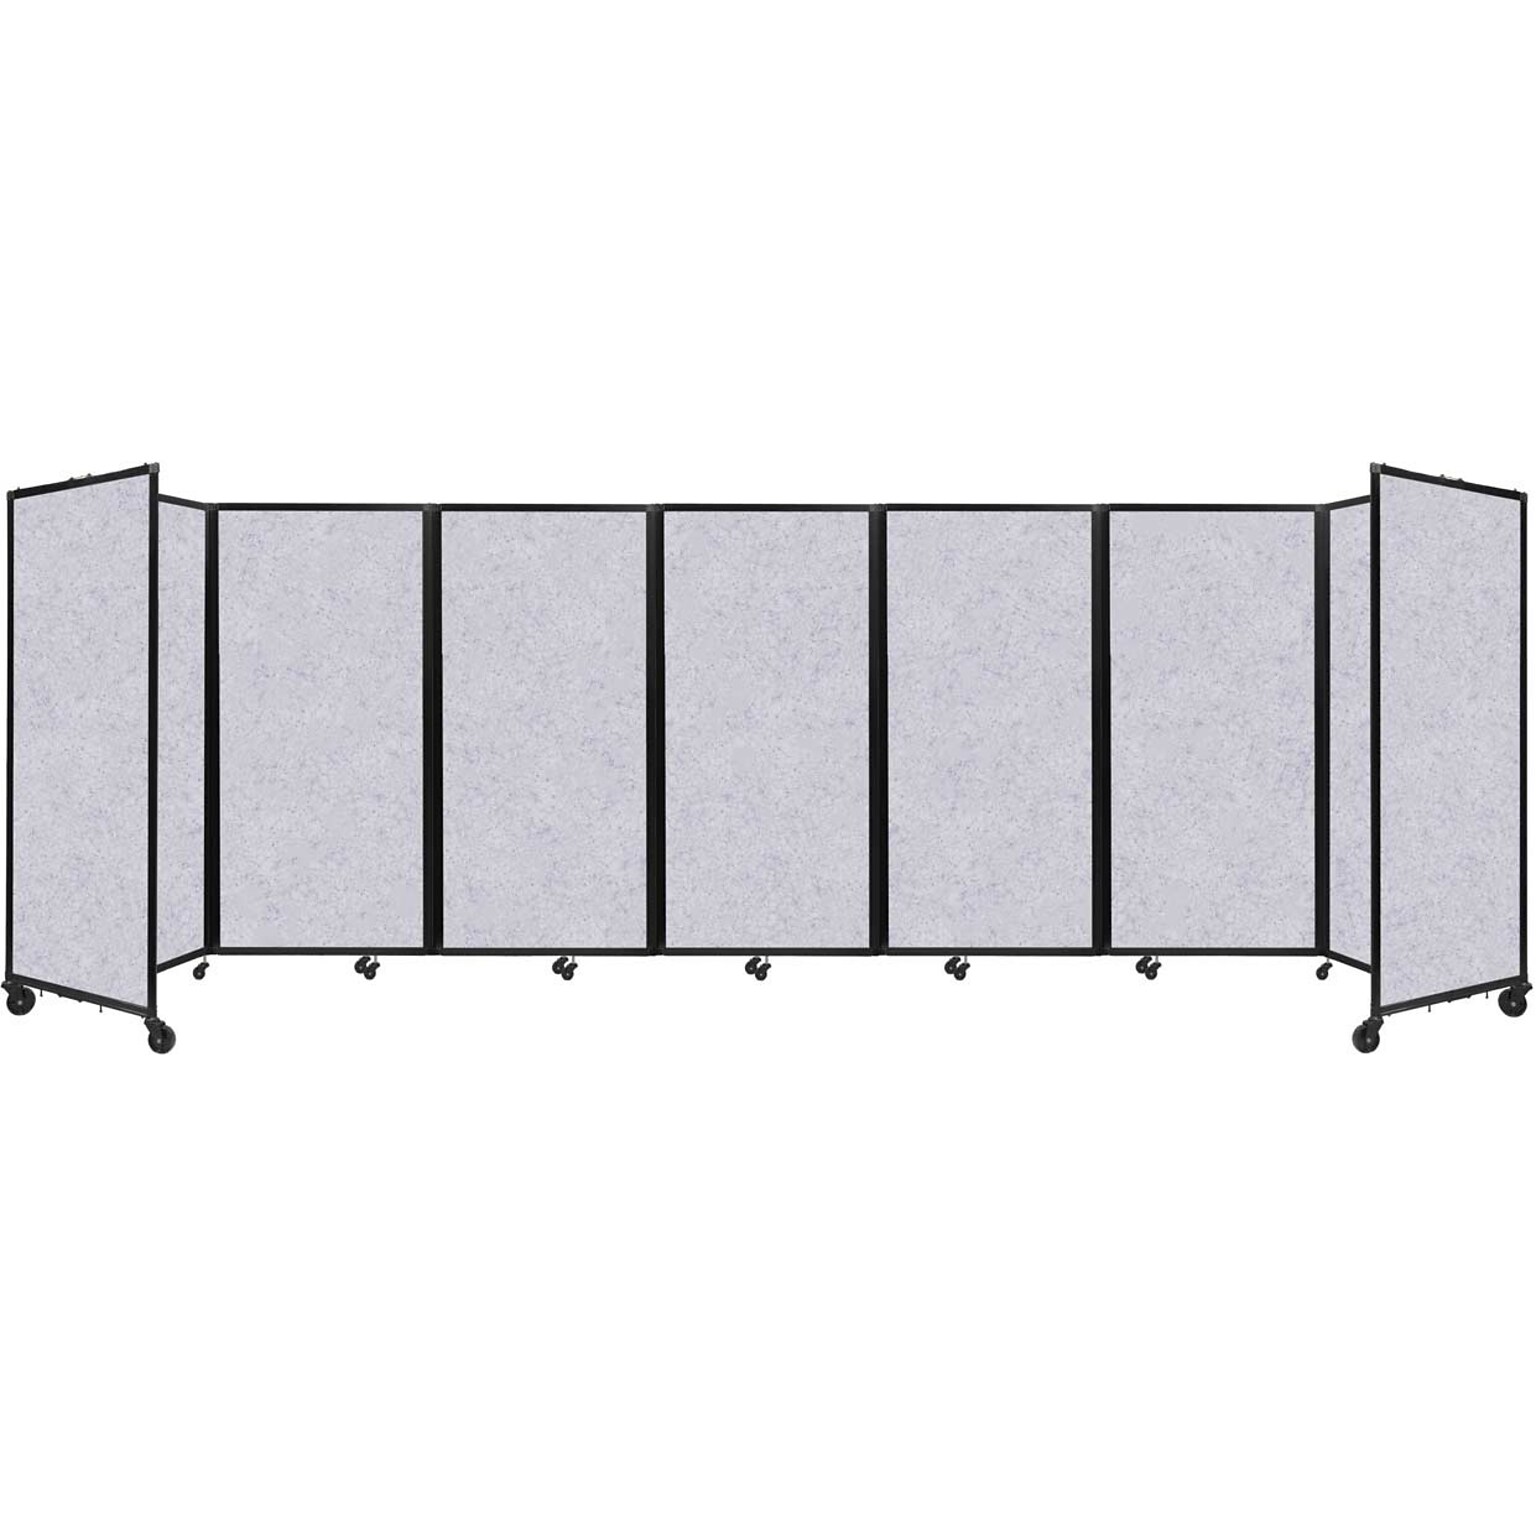 Versare The Room Divider 360 Freestanding Folding Portable Partition, 72H x 234W, Marble Gray SoundSorb Fabric (1932201)